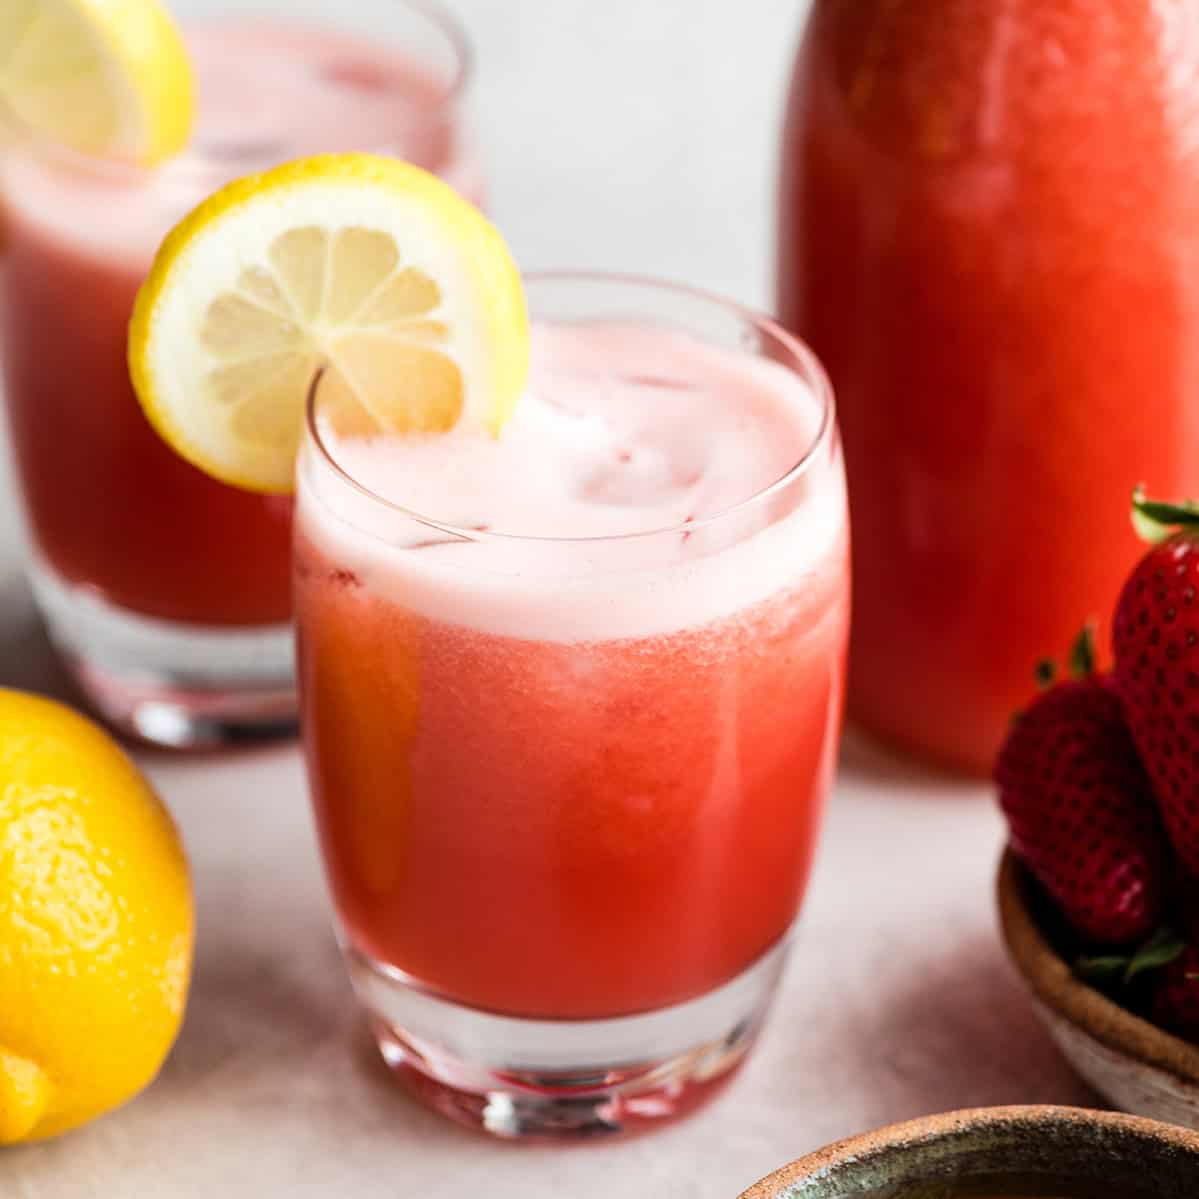 Homemade Strawberry Lemonade in two glasses and a glass pitcher